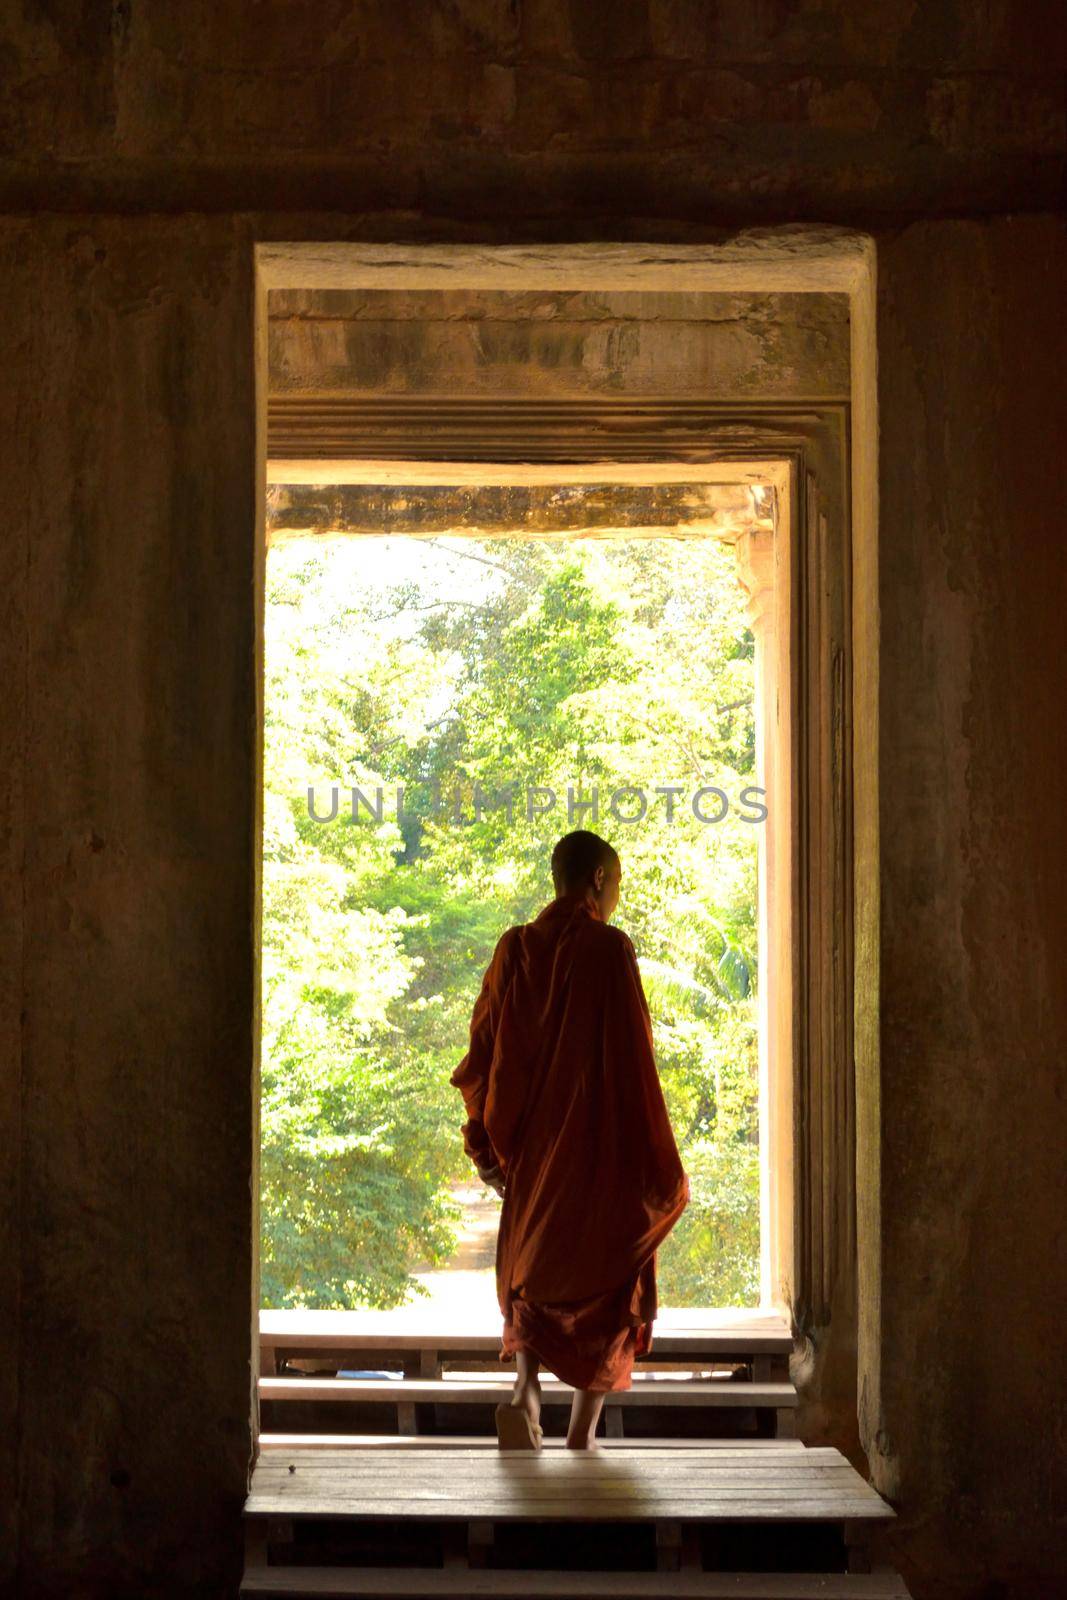 January 3rd 2017, Cambodia, Buddhist monk coming out of one of the doors of the Angkor Wat temple